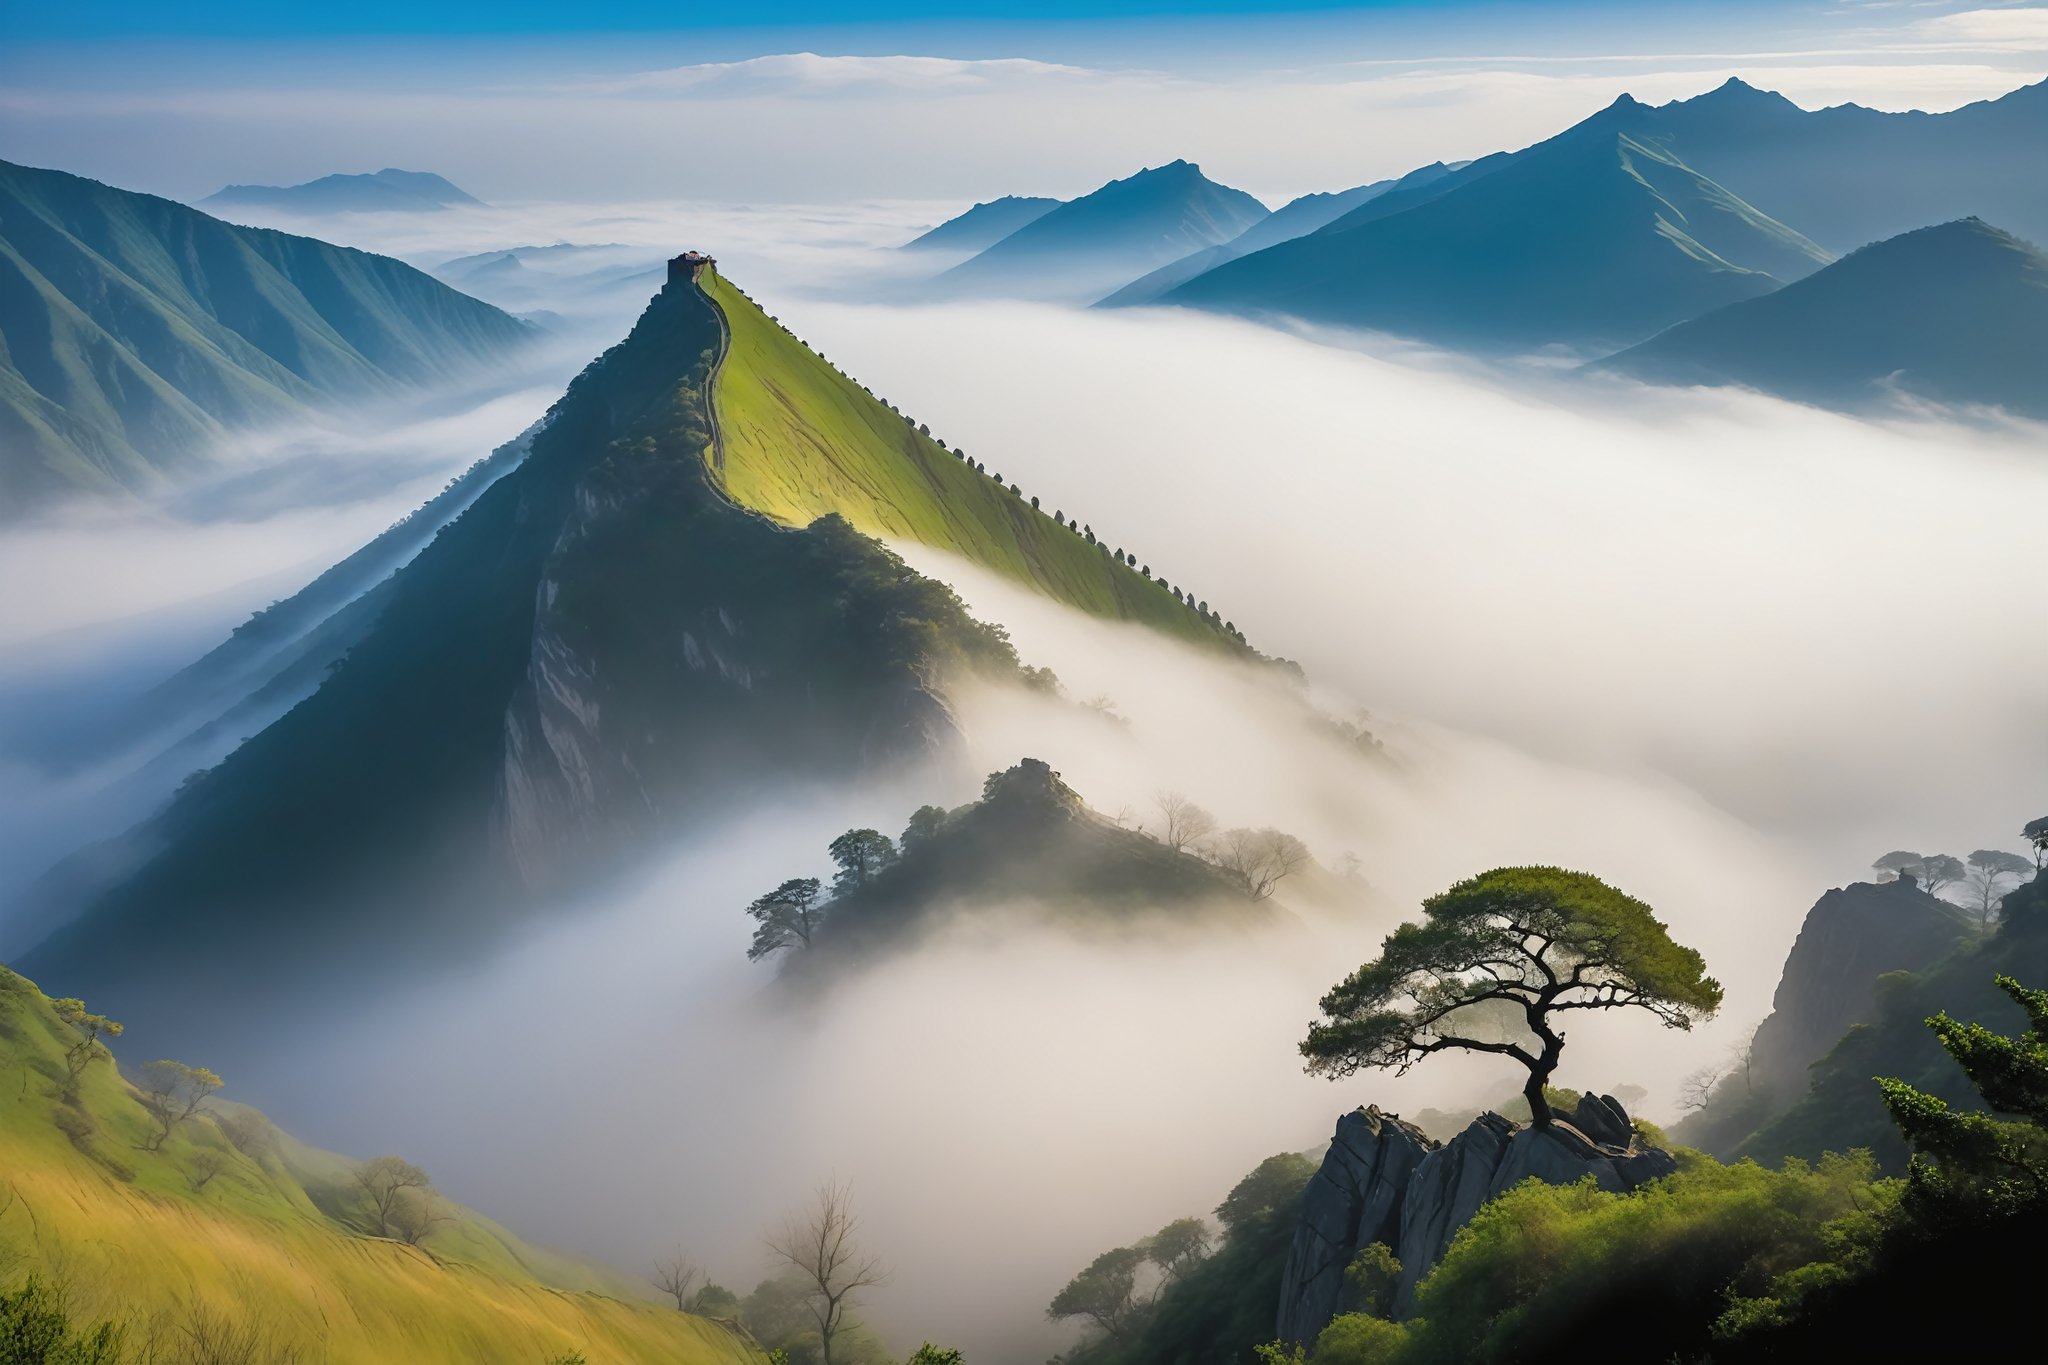 A majestic scene unfolds: Longmen Mountain's serpentine shape stretches across the horizon, its peak vanishing into a veil of cottony clouds and wispy mist. The rugged terrain slopes downward, creating a sense of depth and drama. In the foreground, a lone tree stands sentinel, its branches outstretched like nature's own arms embracing the mist-shrouded mountain.